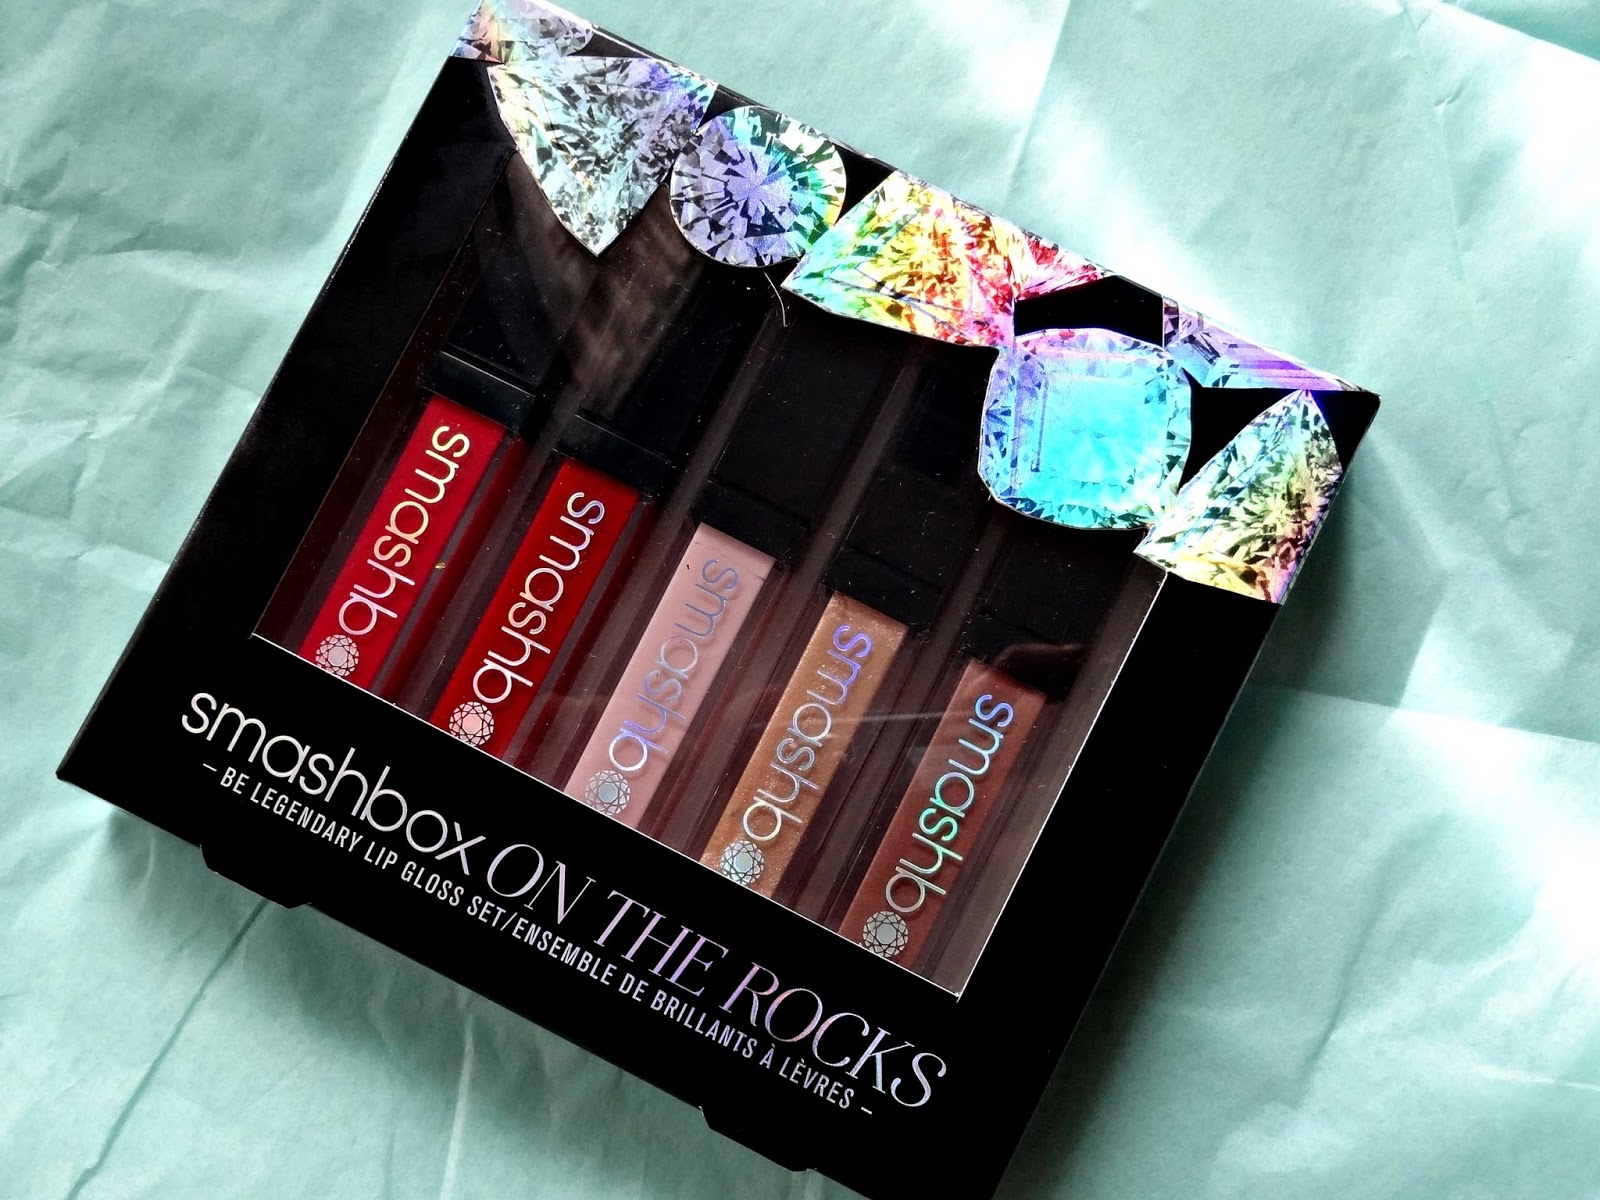 Smashbox On the Rocks Be legendary Lip gloss Set Smashbox Holiday 2014 Limited Edition Review, Photos & Swatches